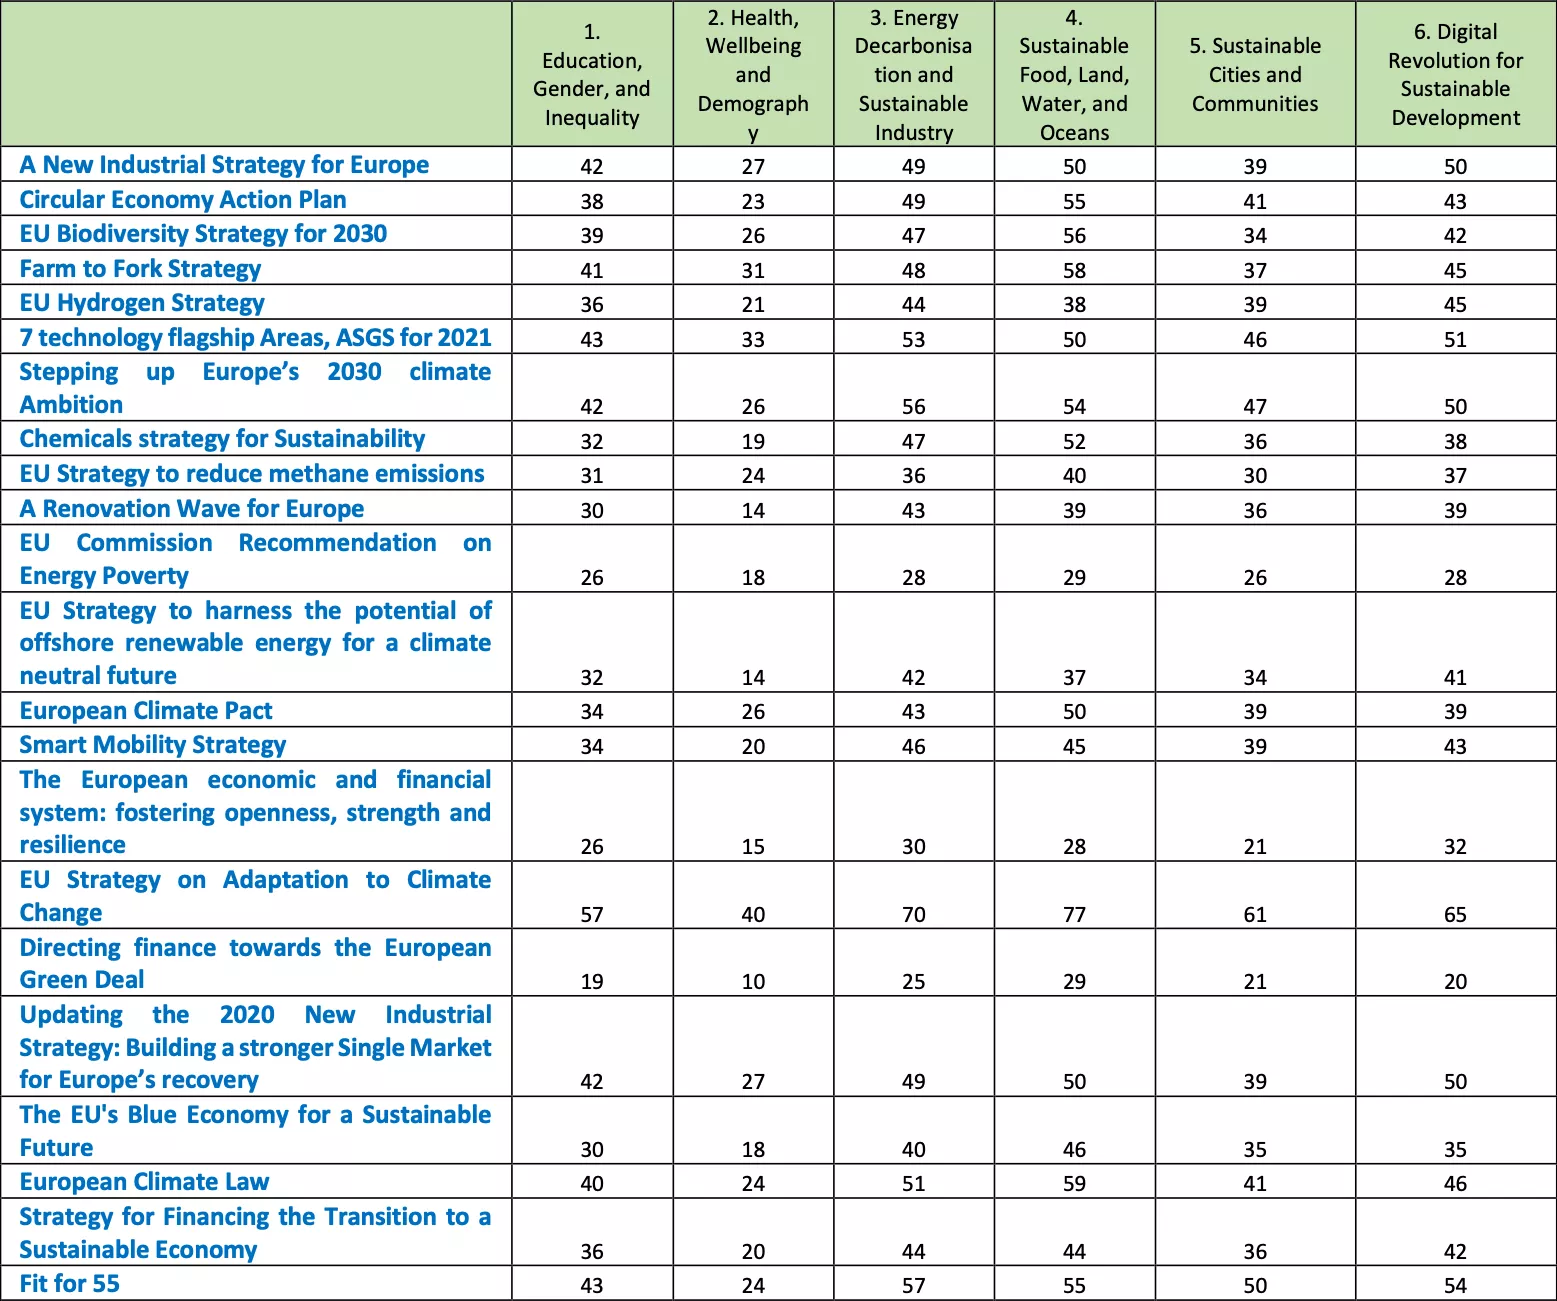 Table 4 Link between Policies and the Six Transformations